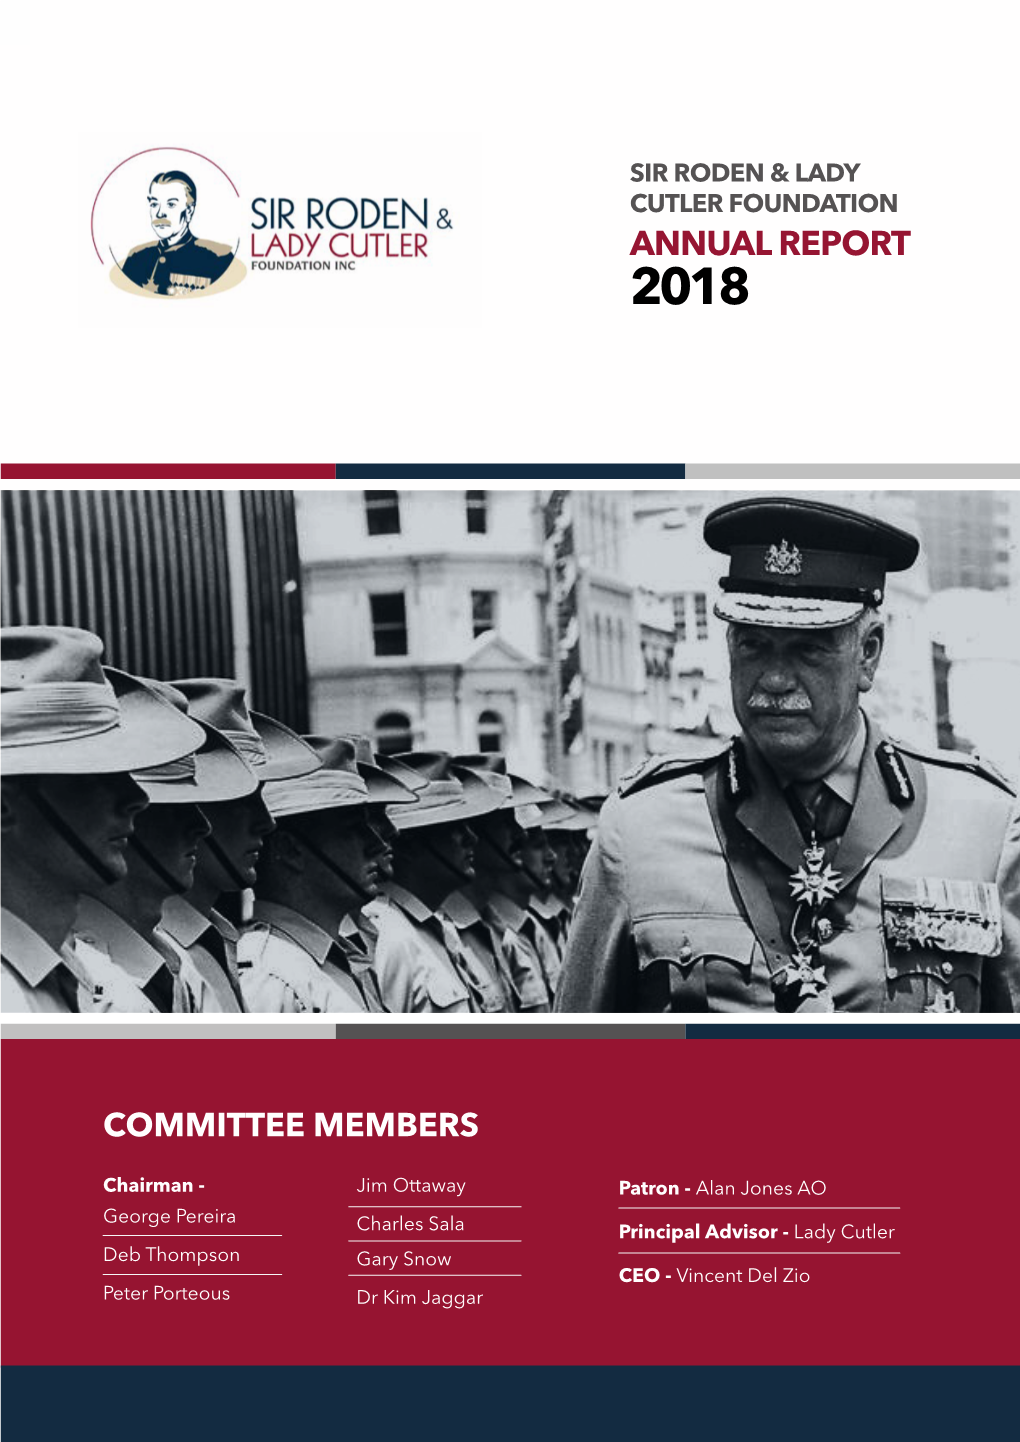 Sir Roden & Lady Cutler Foundation Annual Report 2018